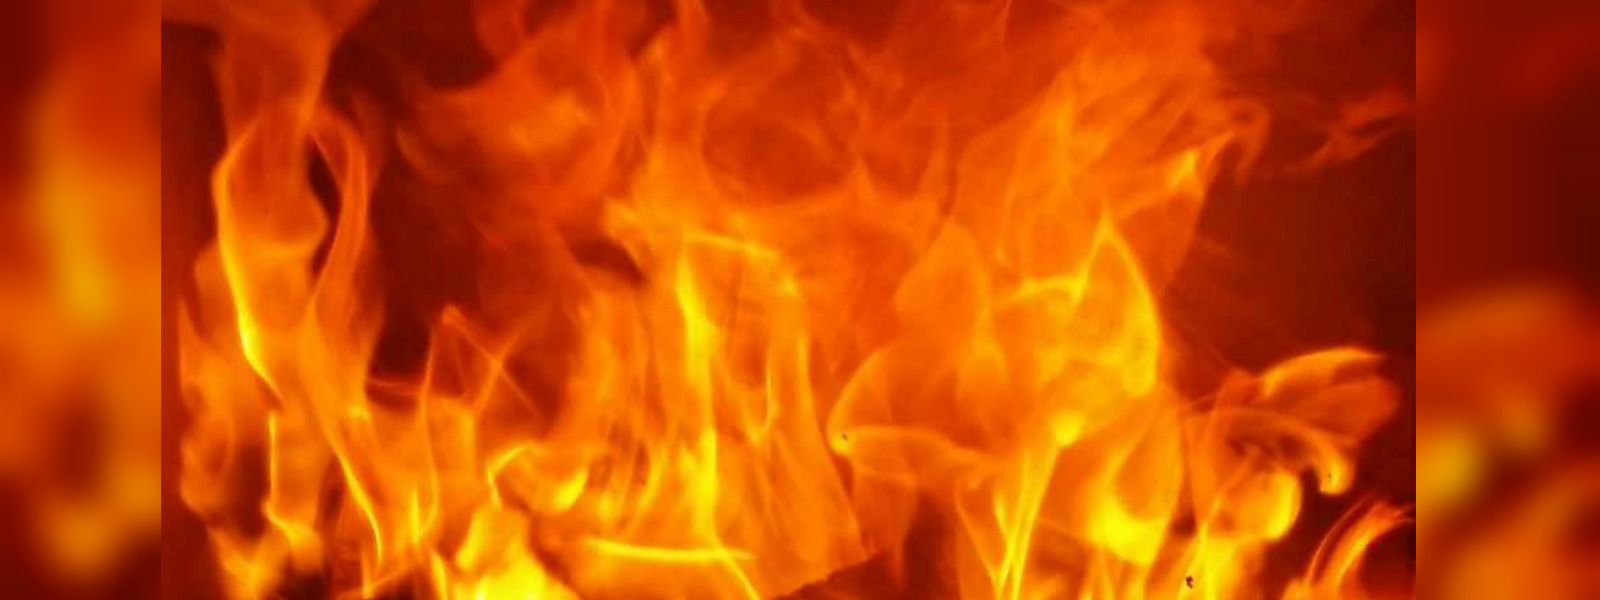 Fire erupts in a two-story house in Col. 2